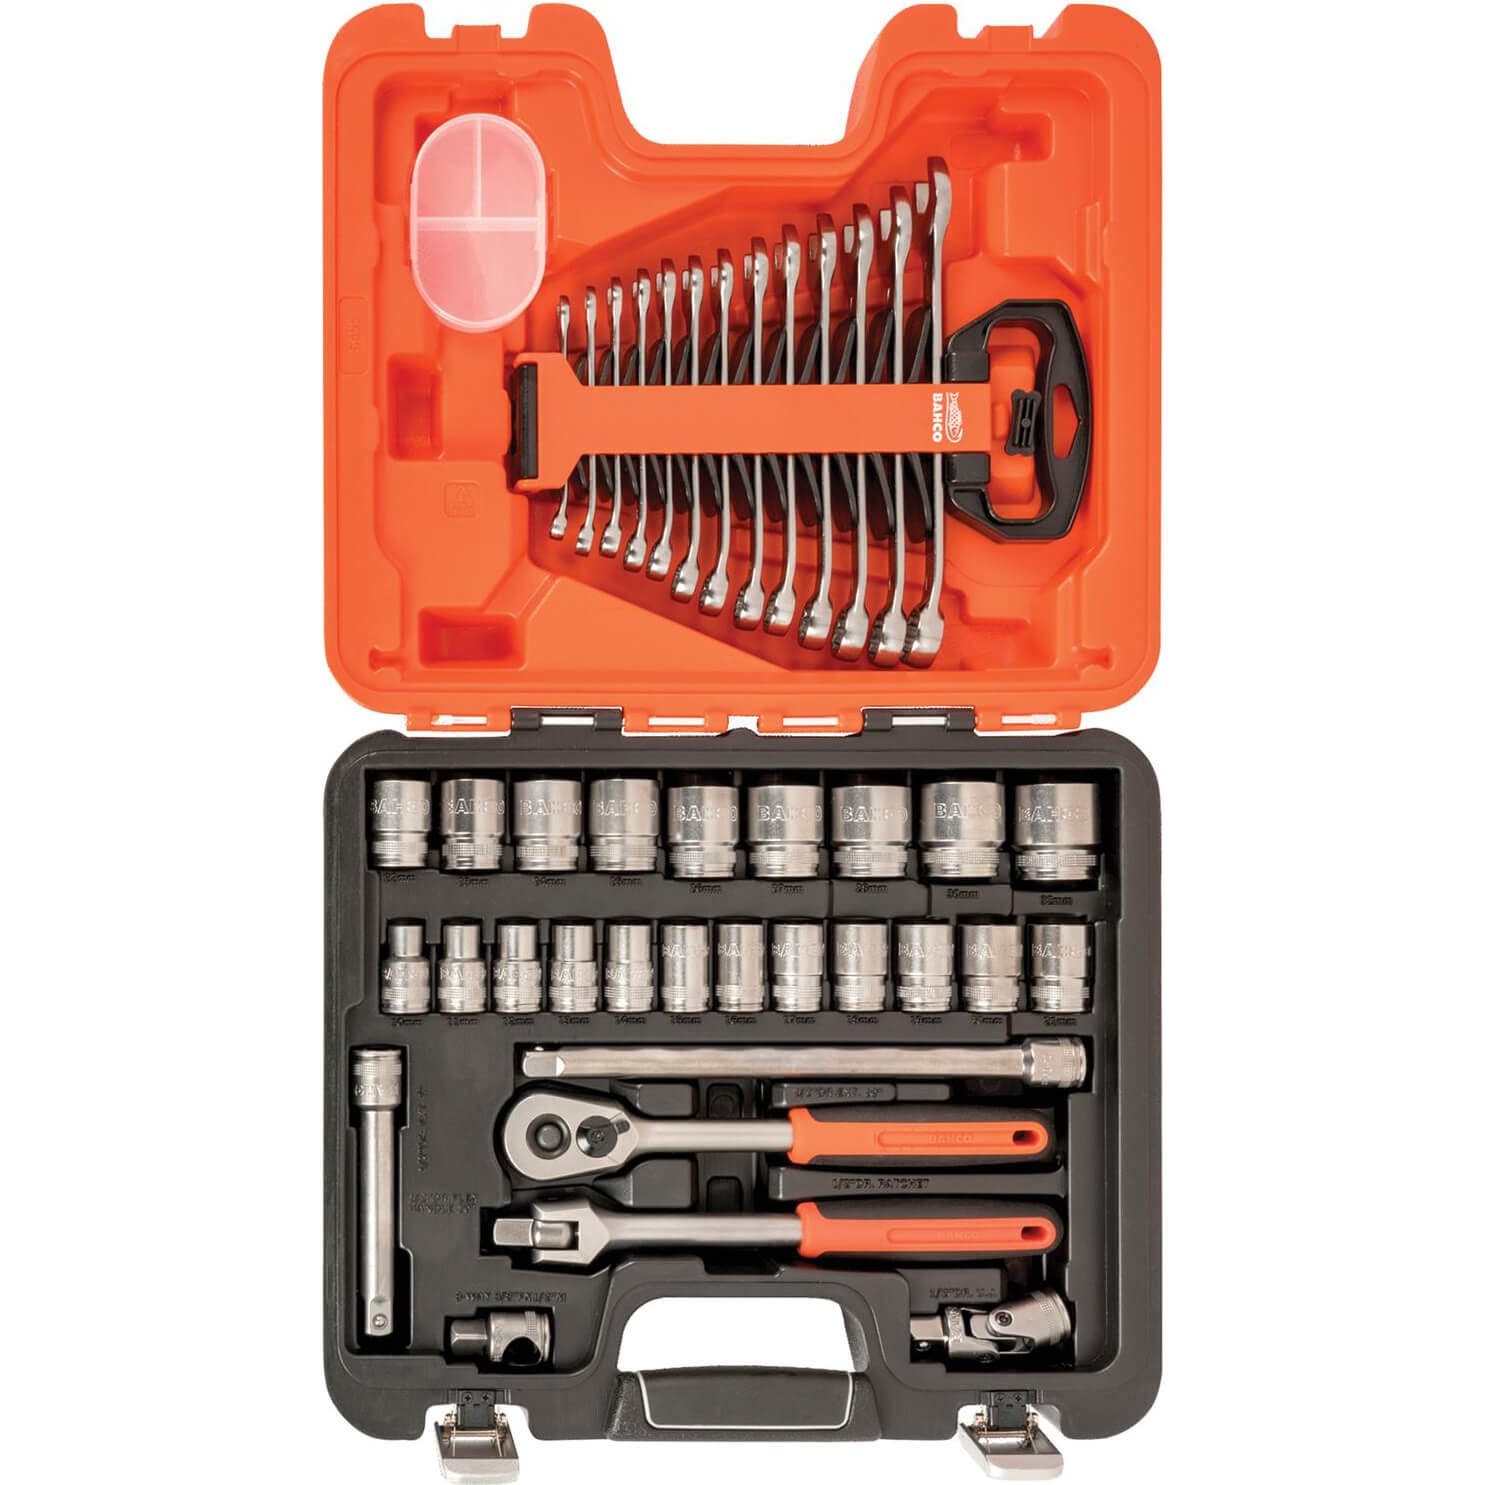 Image of Bahco S400 40 Pieces 1/2In Drive Socket and Spanner Set 1/2"